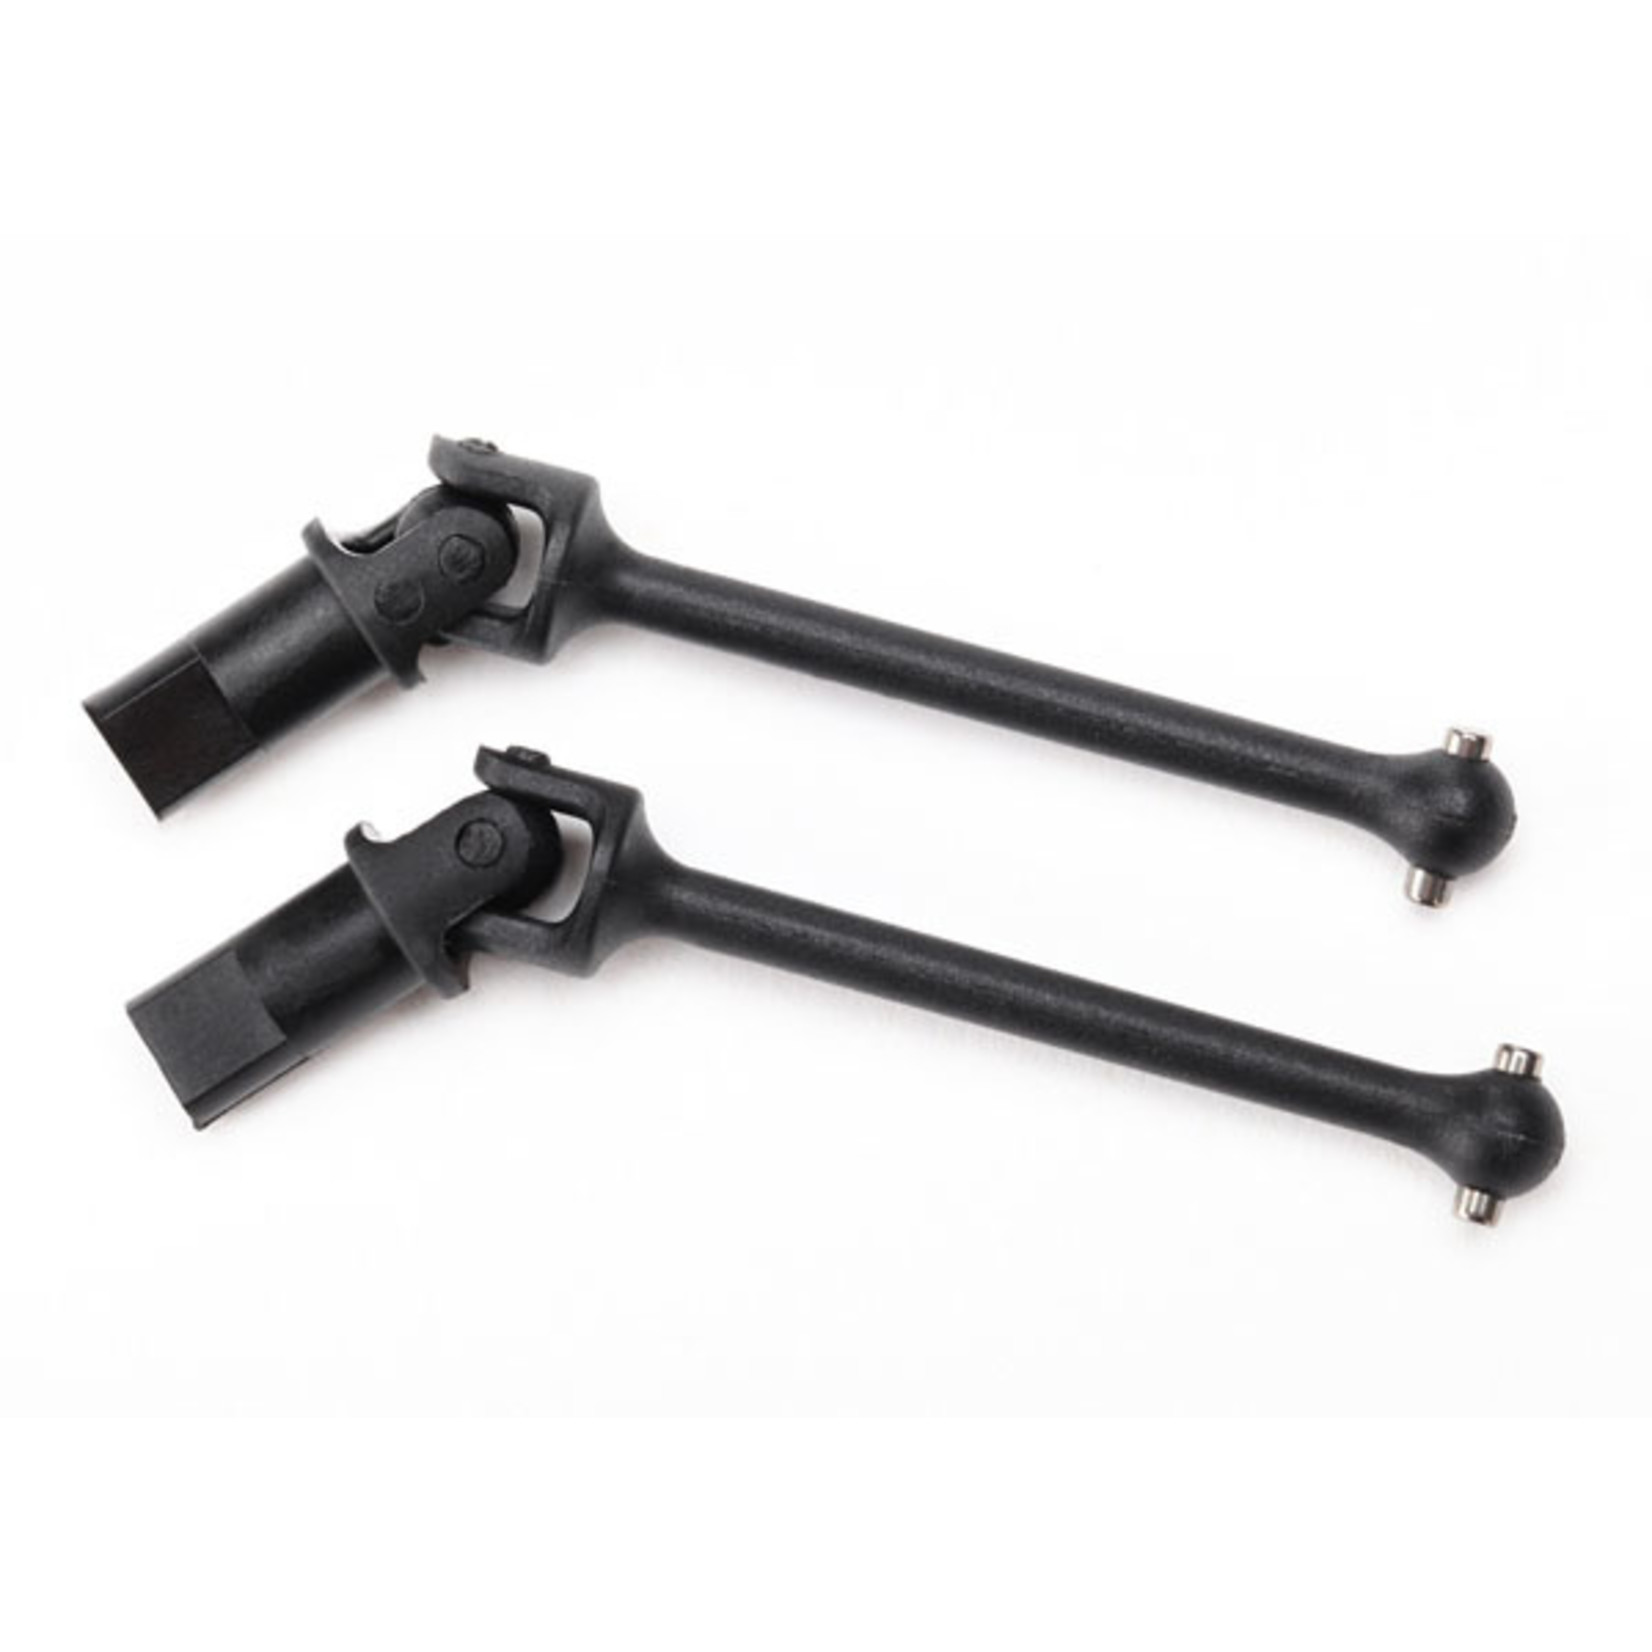 Traxxas 7650 - Driveshaft assembly, front or rear (2)